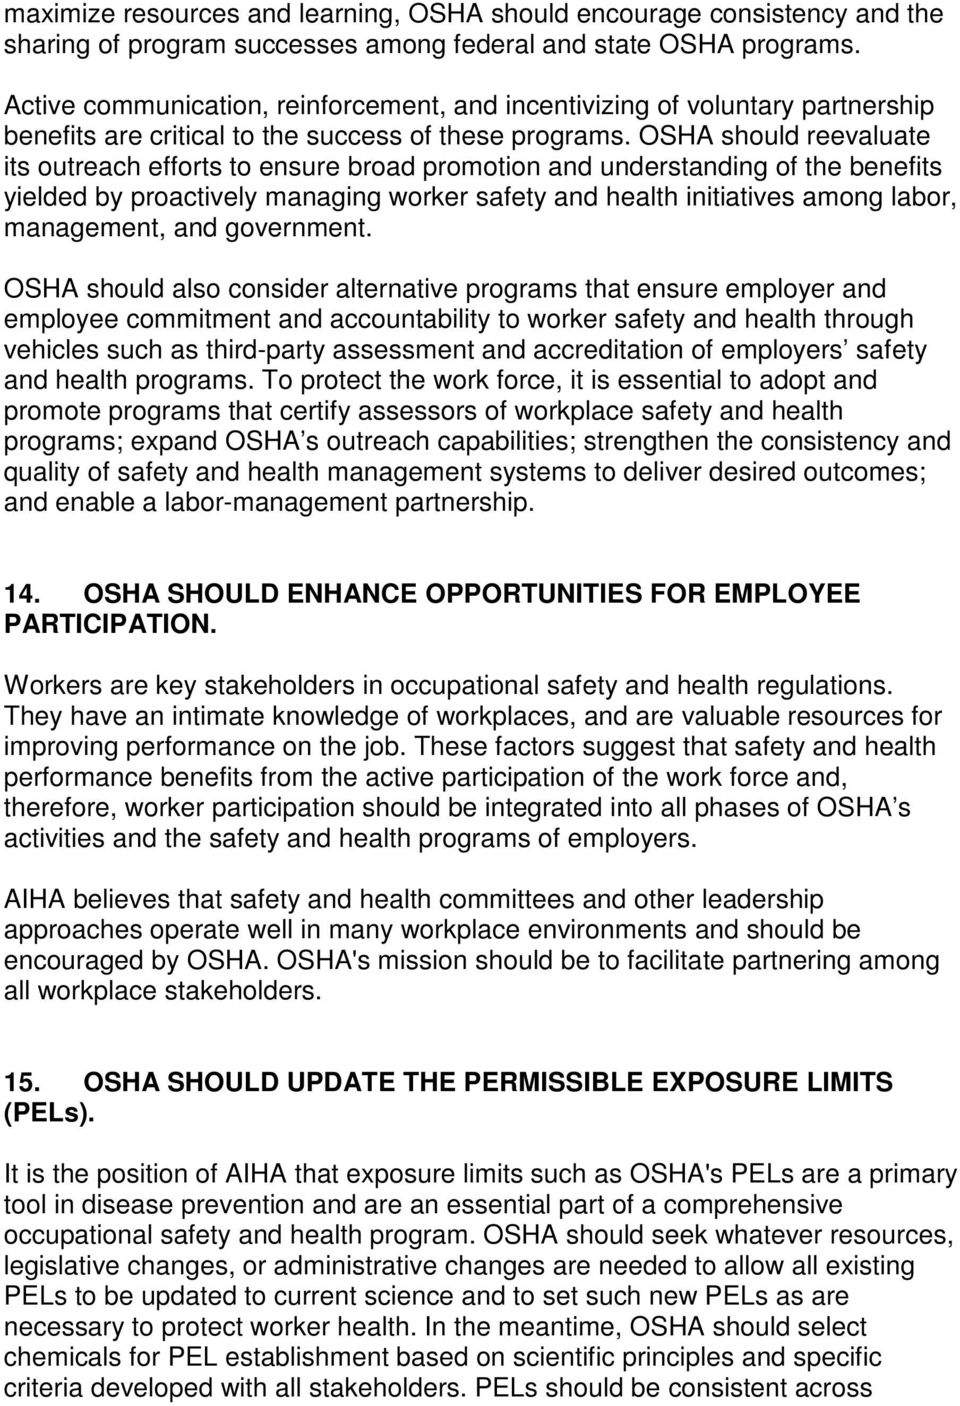 OSHA should reevaluate its outreach efforts to ensure broad promotion and understanding of the benefits yielded by proactively managing worker safety and health initiatives among labor, management,